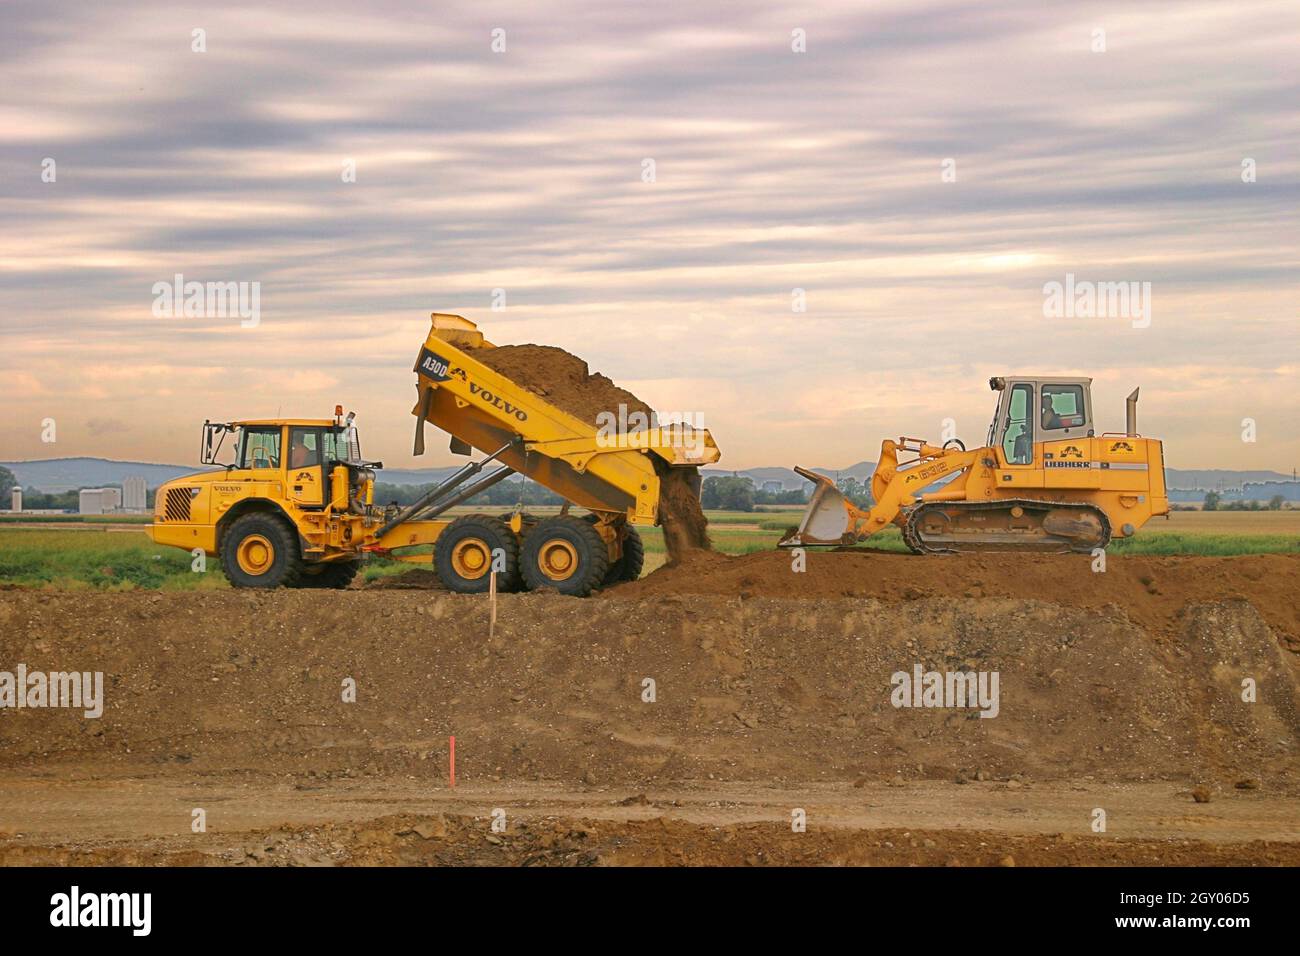 Crawler-type vehicle and truck on a building site, Austria Stock Photo